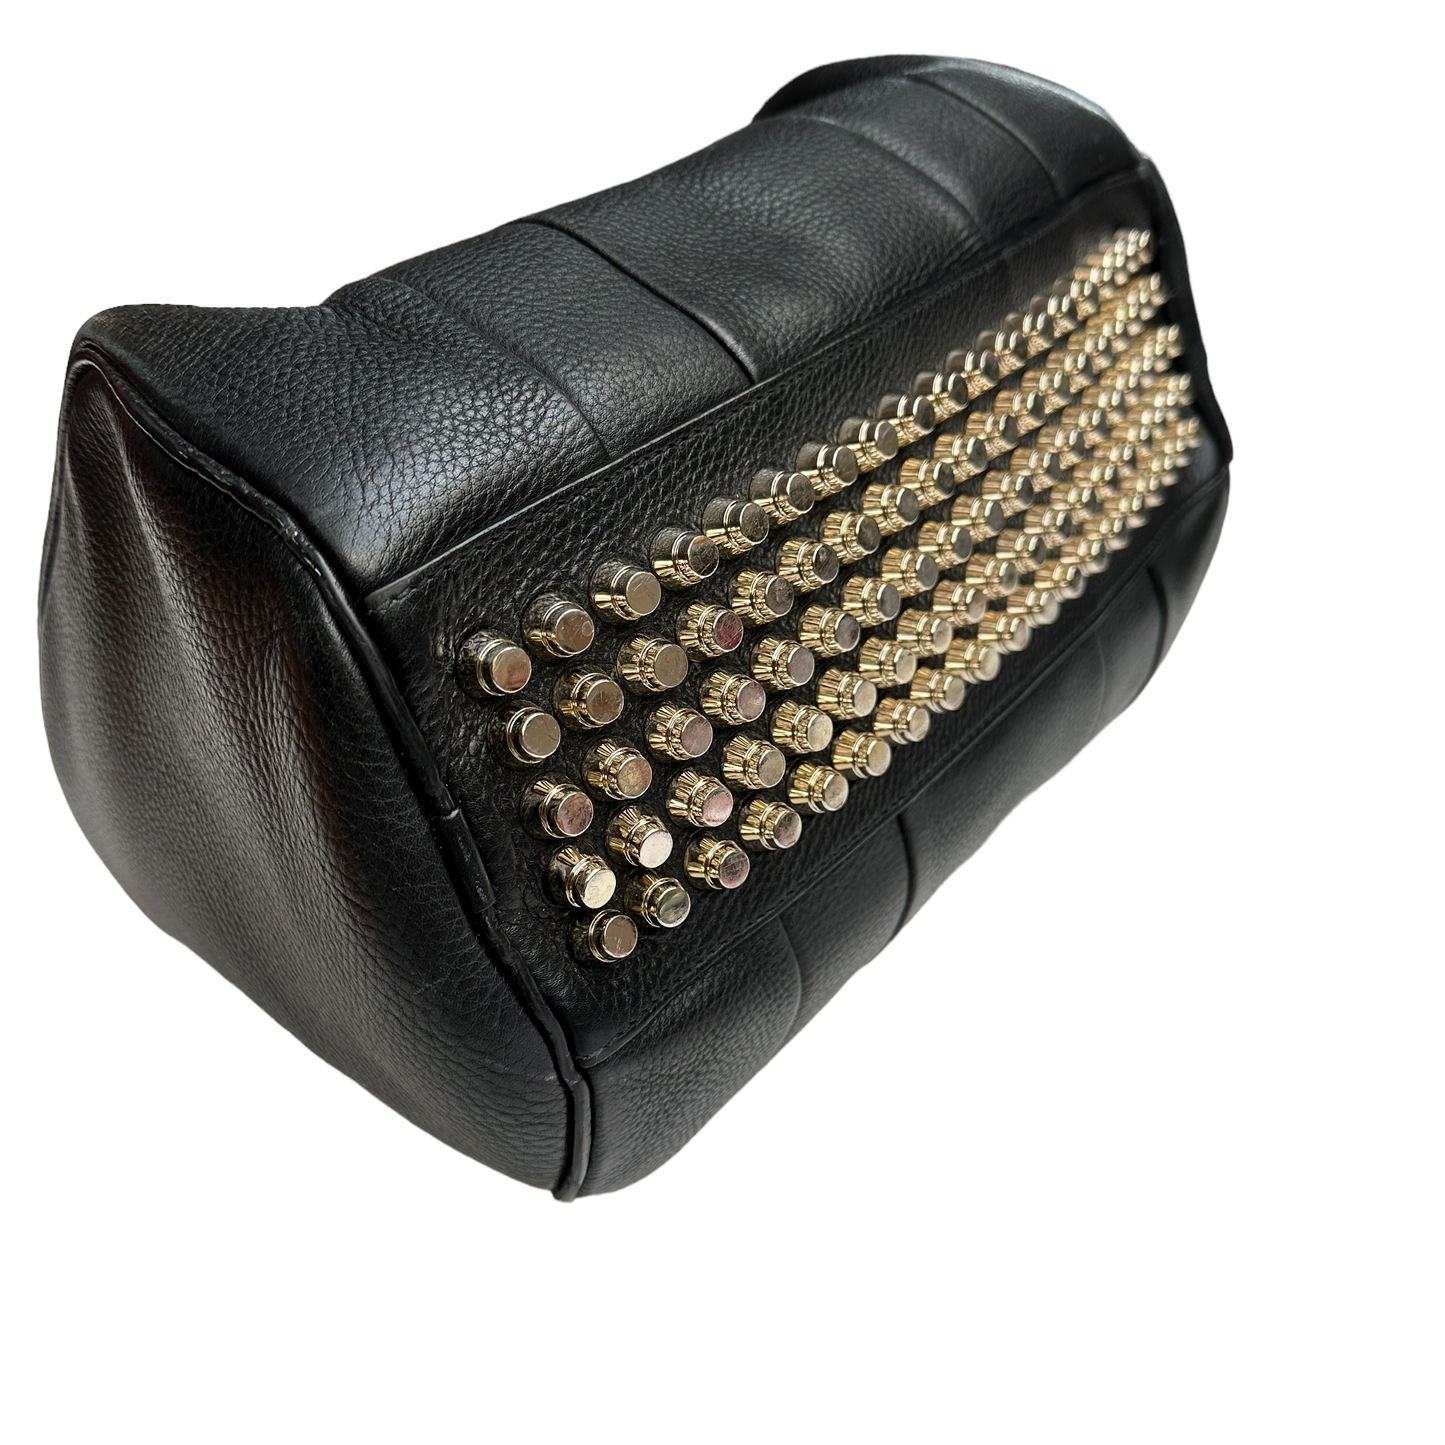 Black Leather Bag with Studs